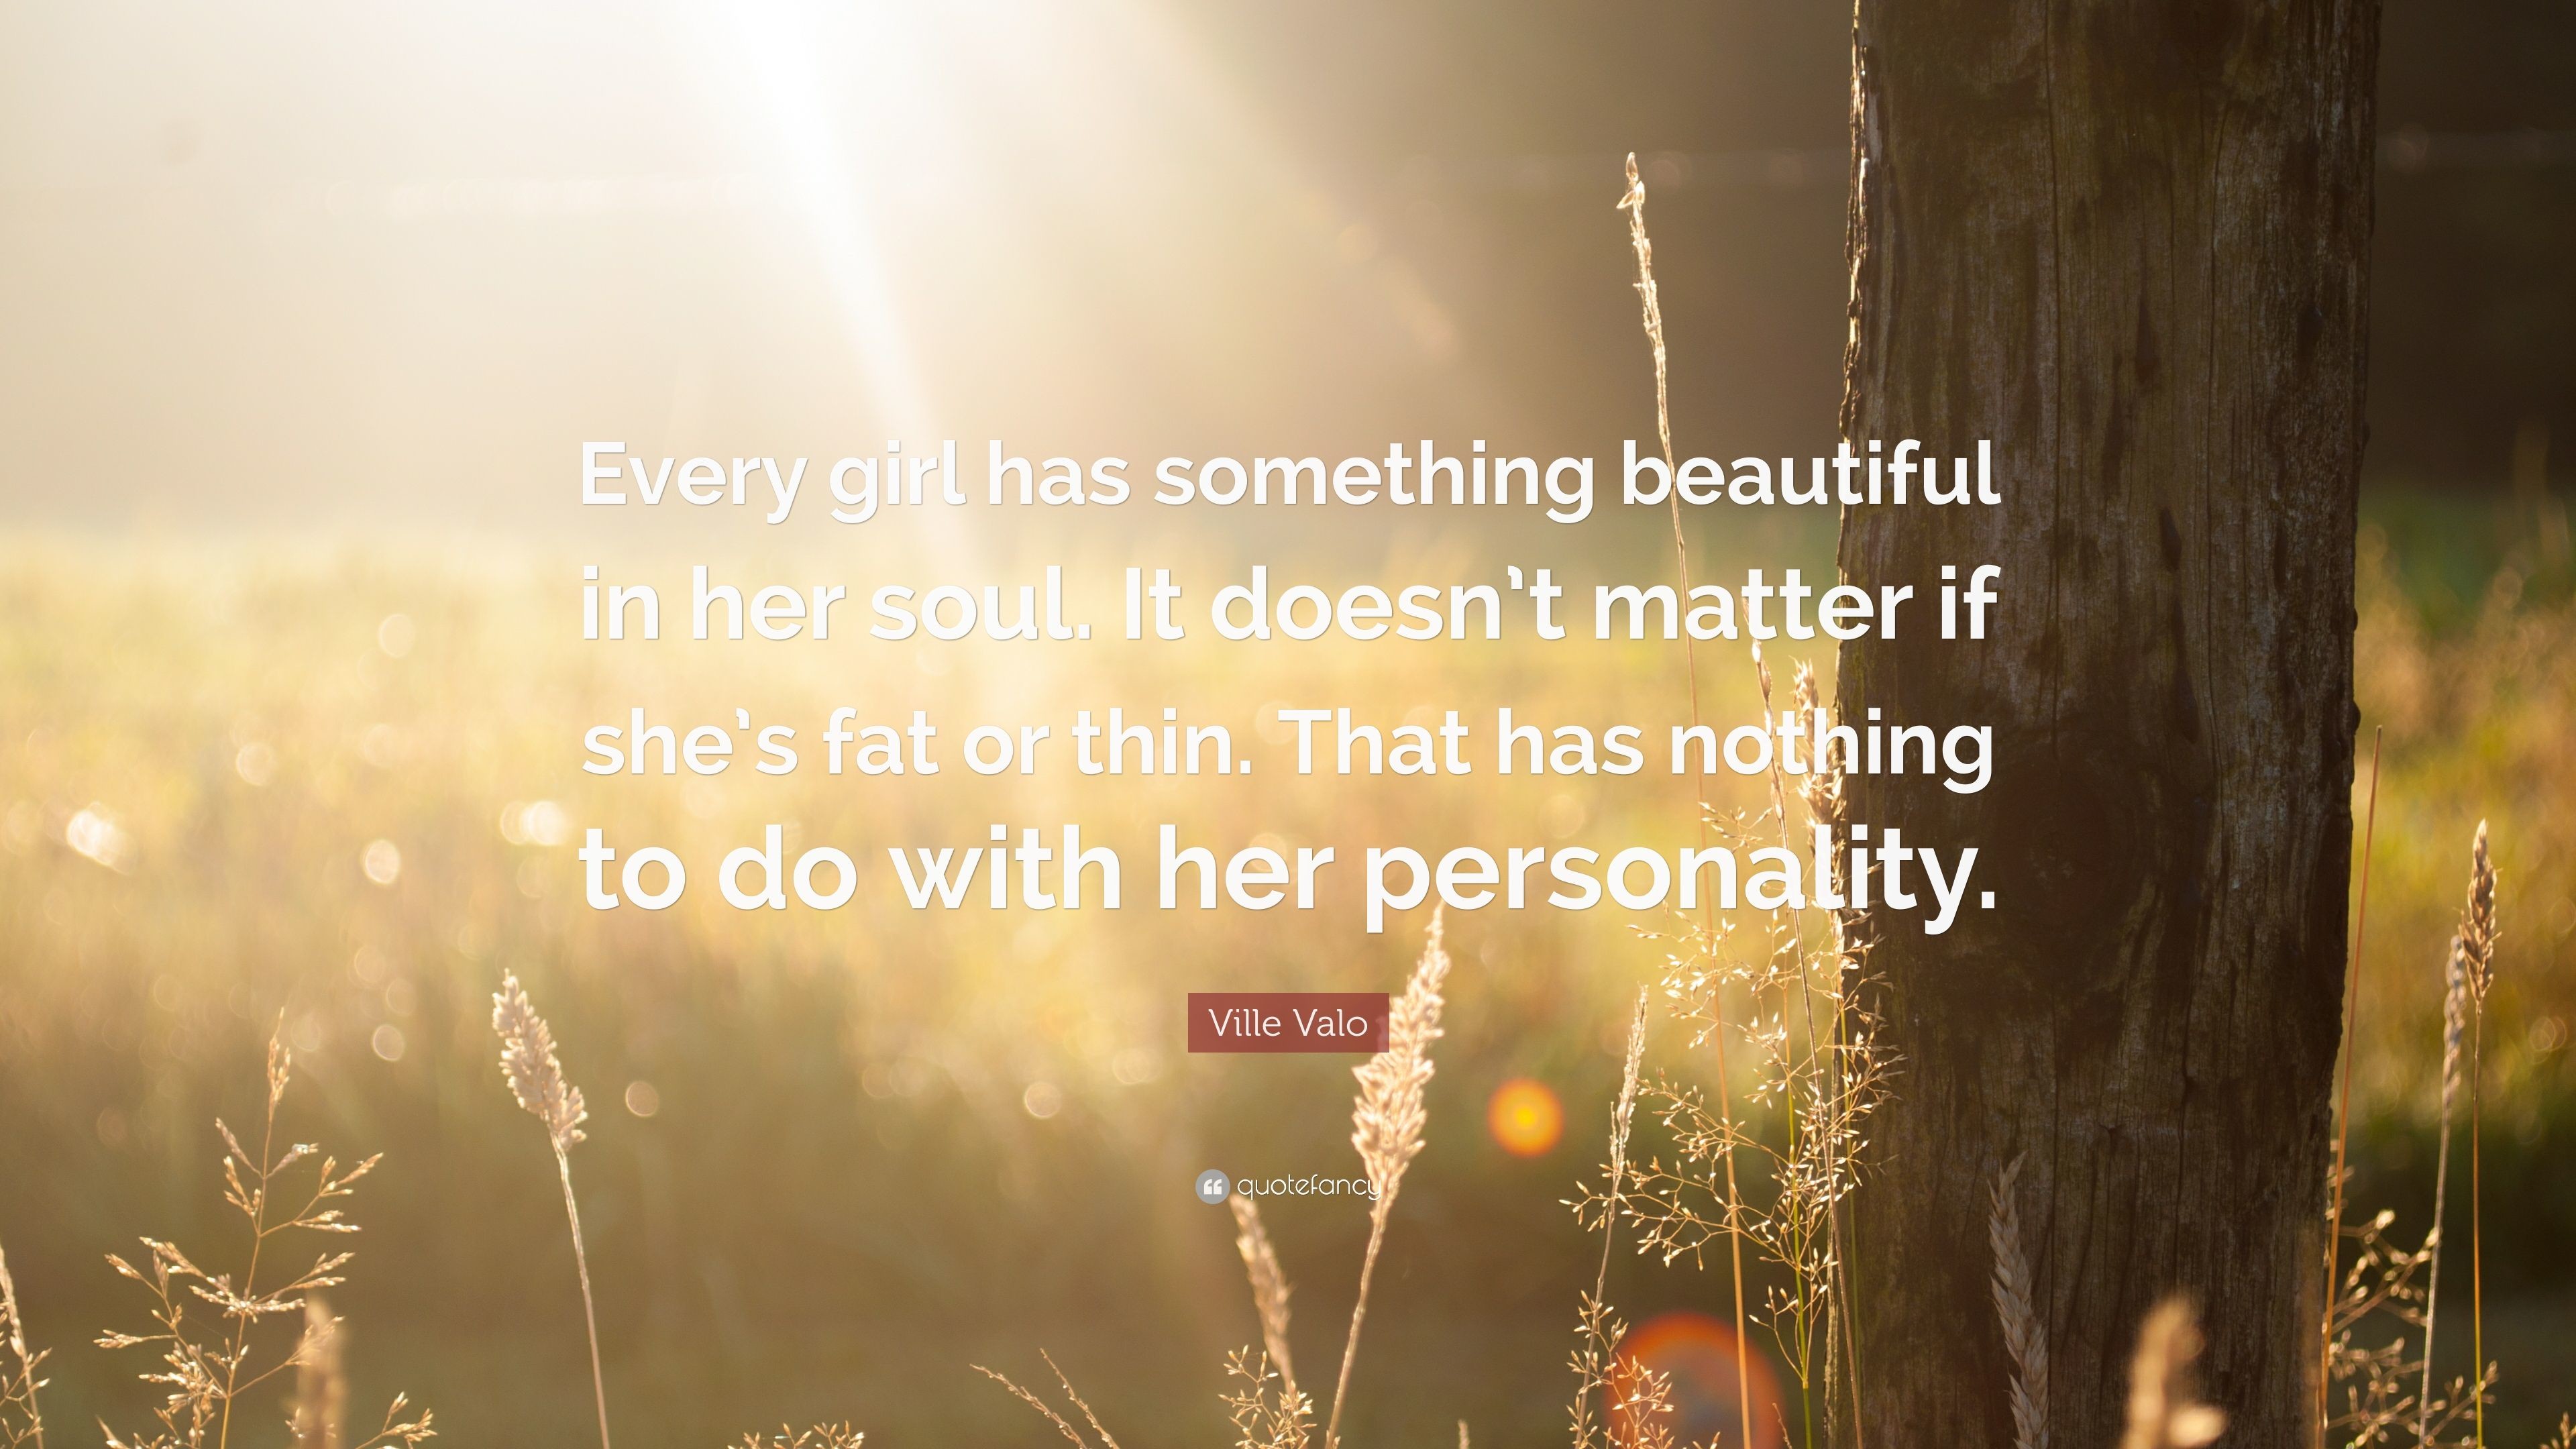 3840x2160 Ville Valo Quote: “Every girl has something beautiful in her soul. It doesn